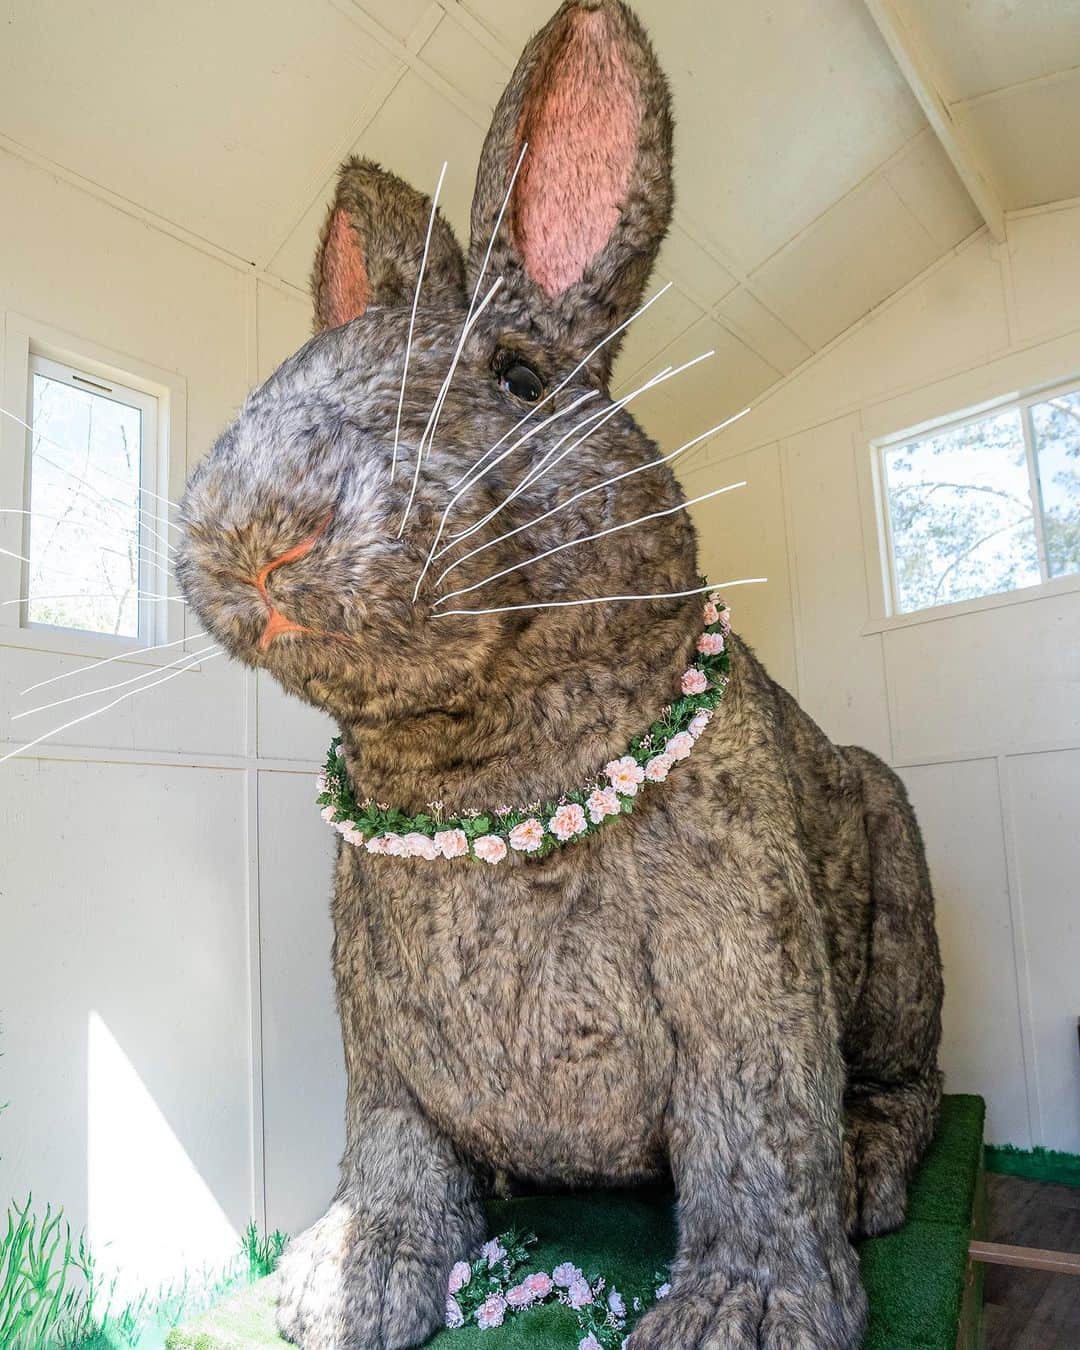 The Venetian Las Vegasのインスタグラム：「Our Lunar New Year Rabbit has found a new home, just in time for Easter! We were thrilled to be able to donate it to Barn Buddies Rescue, where it will become part of Hazel’s House for Hares, the new “rabbitat” rabbit sanctuary at The Farm.」